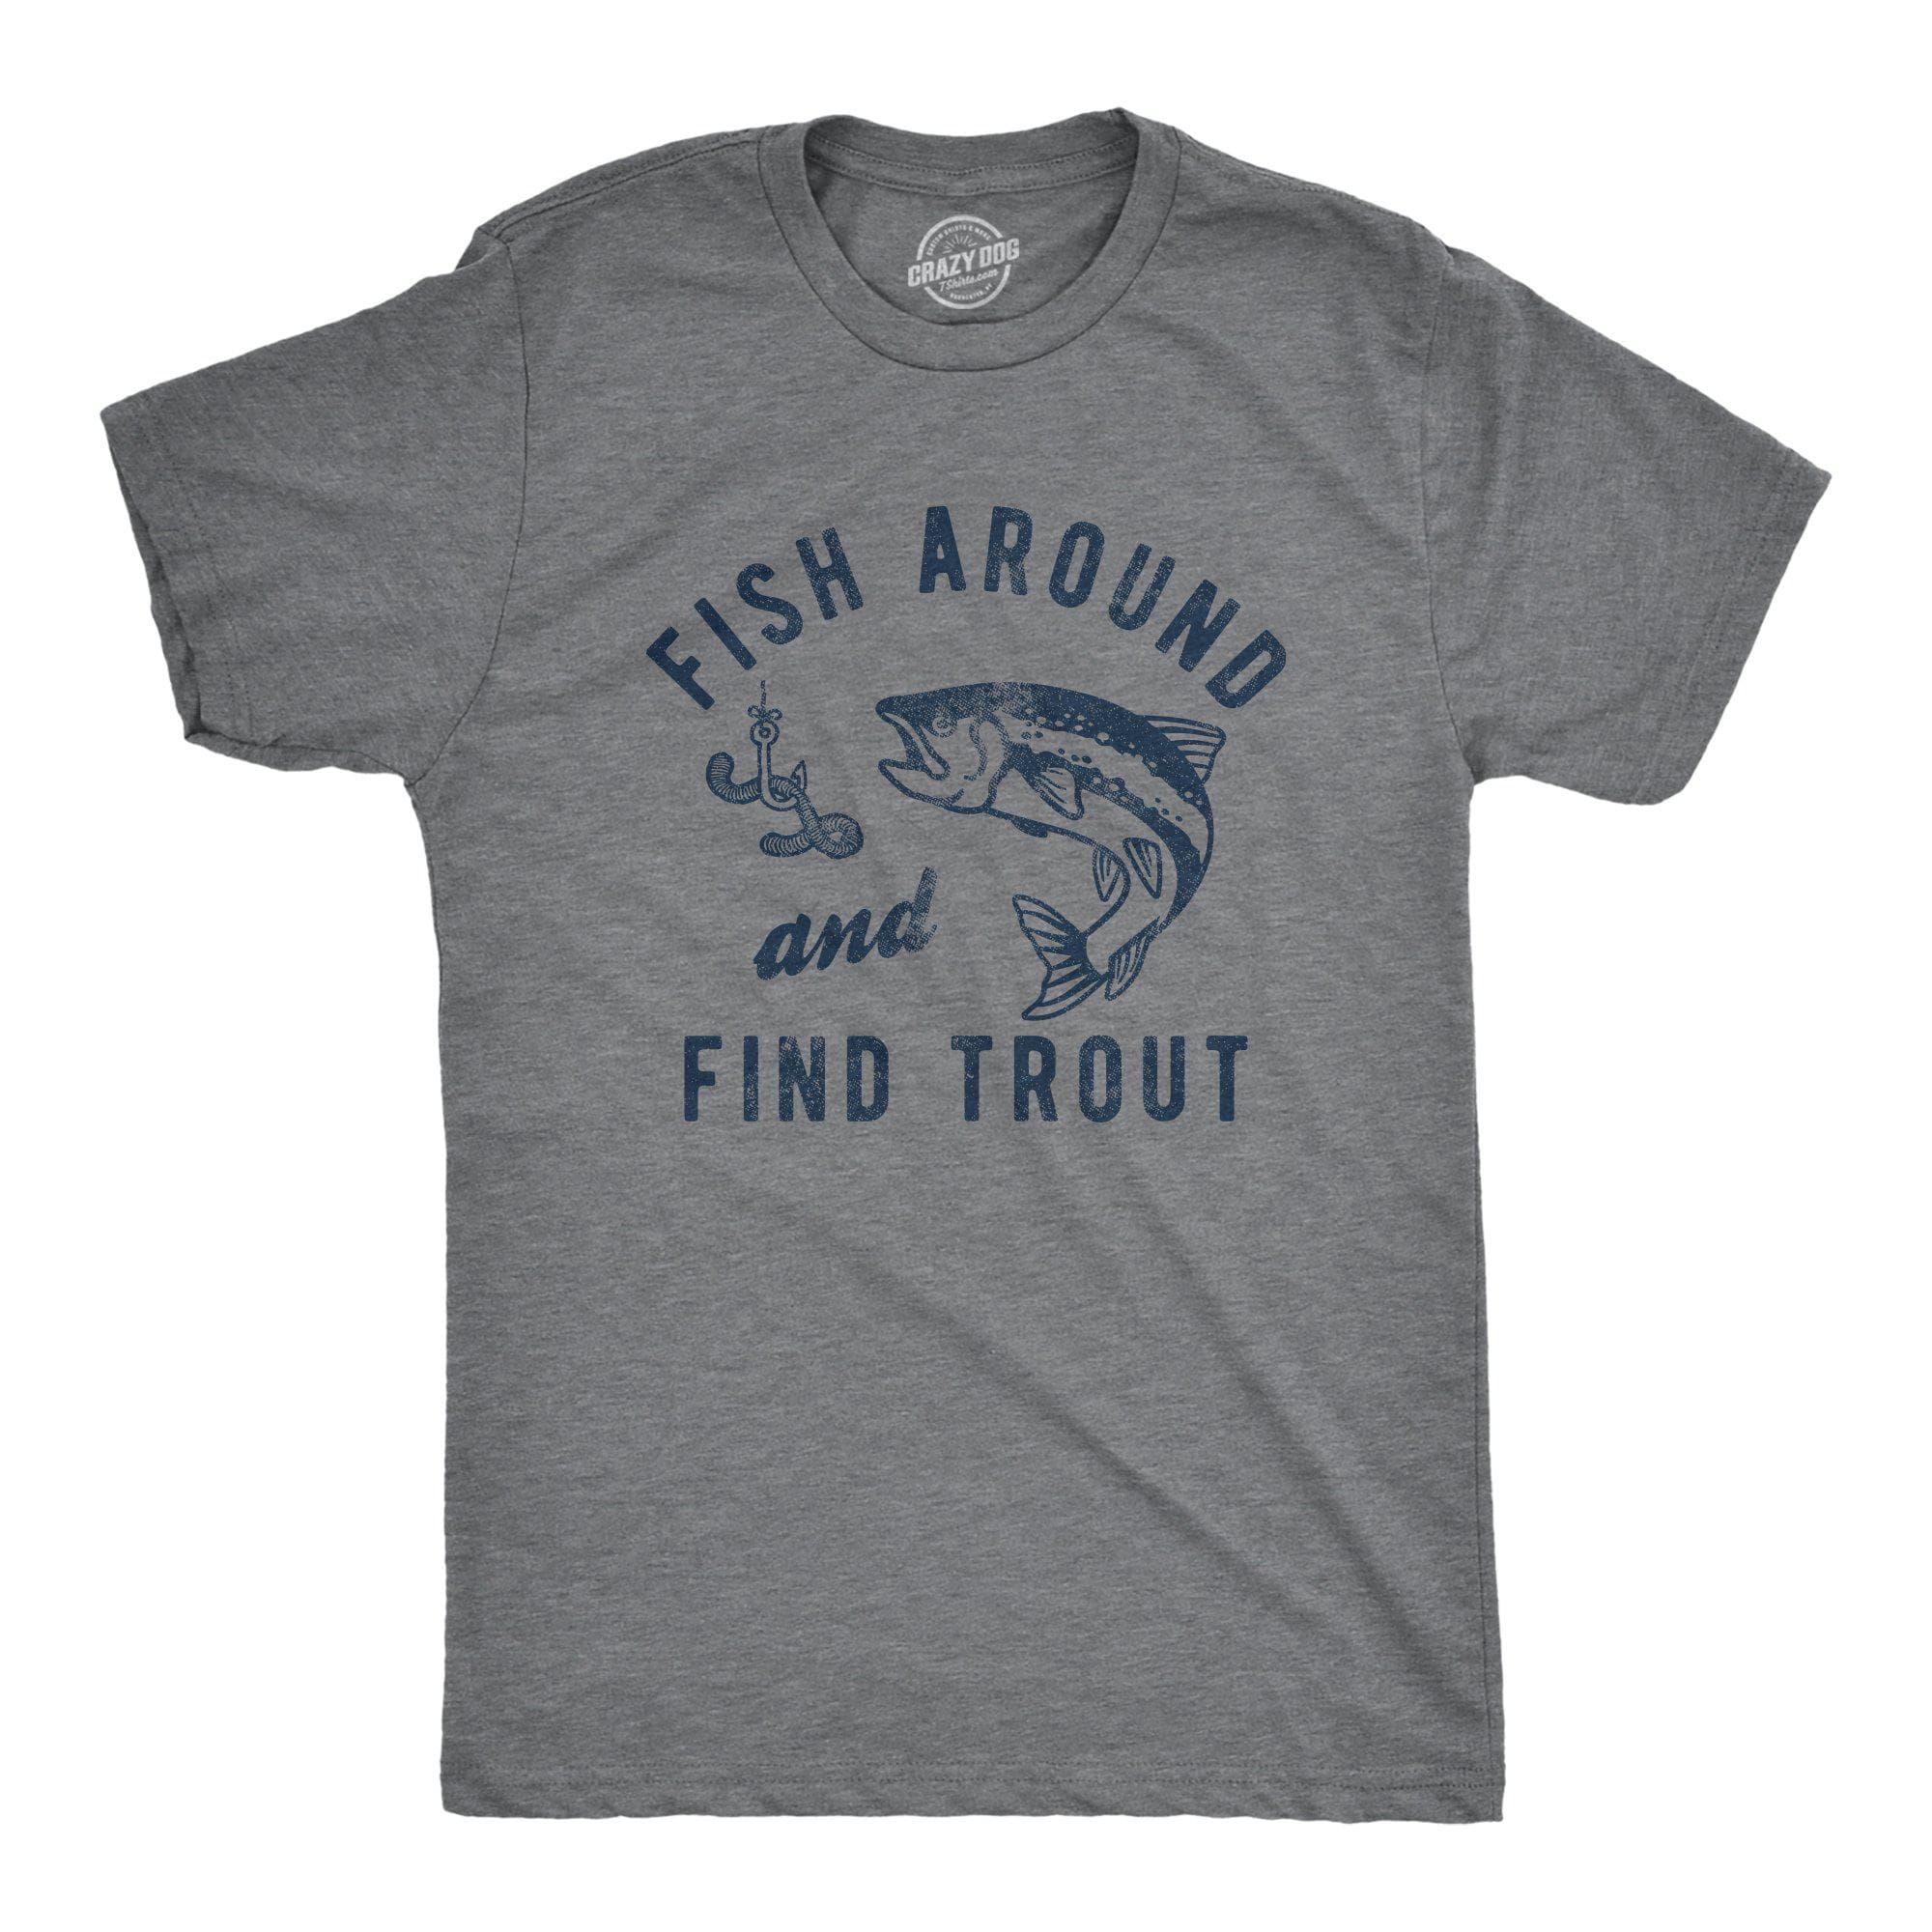 https://cdn.shopify.com/s/files/1/2959/1448/products/crazy-dog-t-shirts-mens-t-shirts-fish-around-and-find-trout-men-s-tshirt-28372483899507_2000x.jpg?v=1631784664